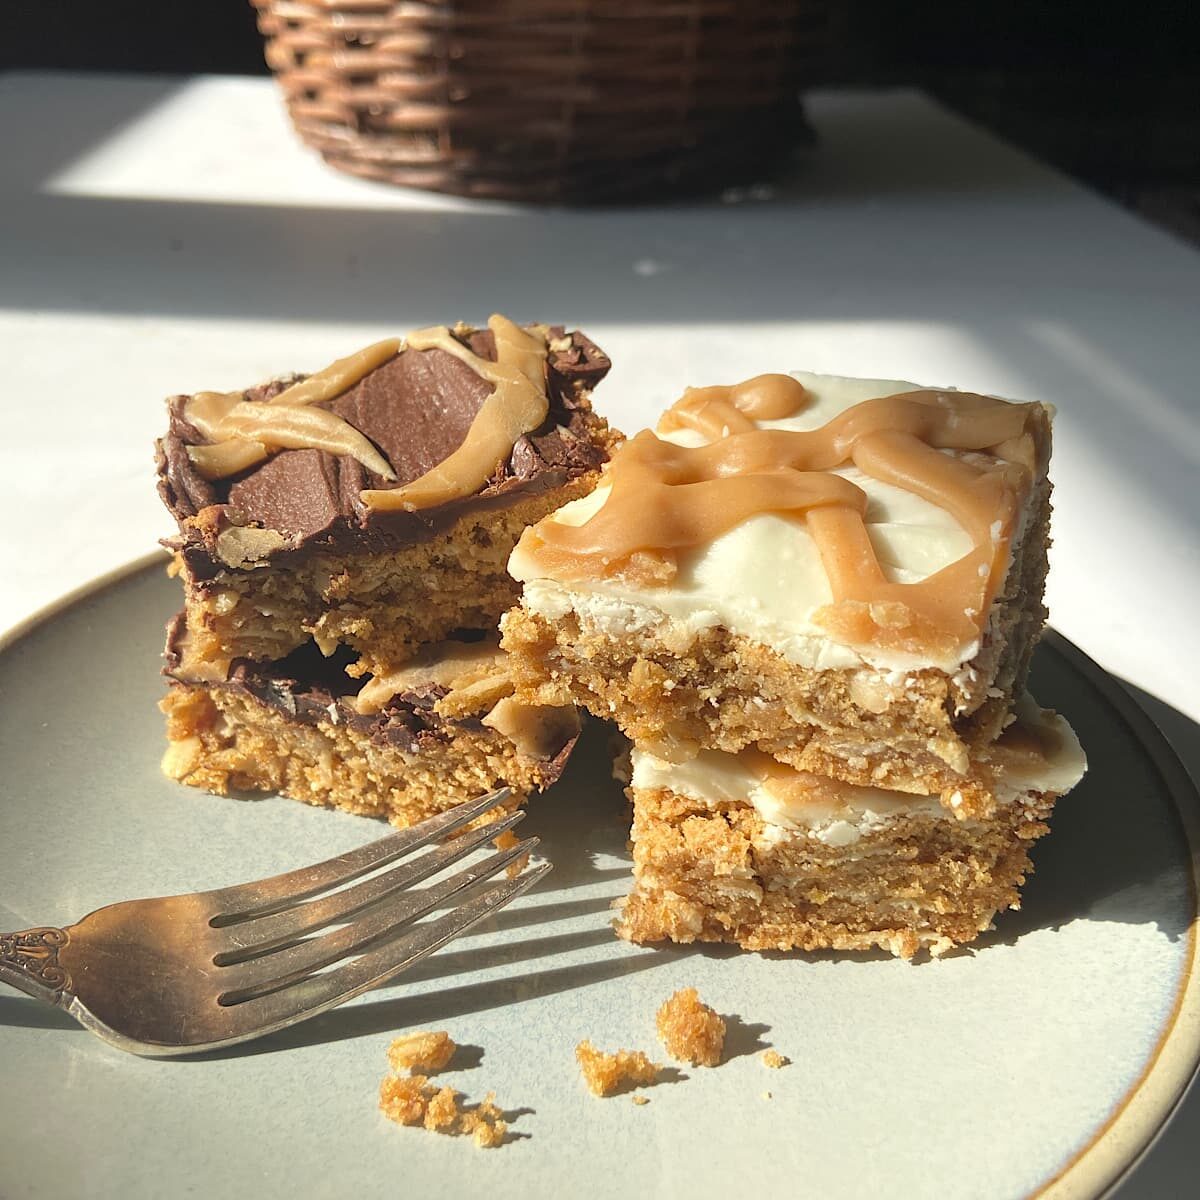 Peanut butter squares on a plate.